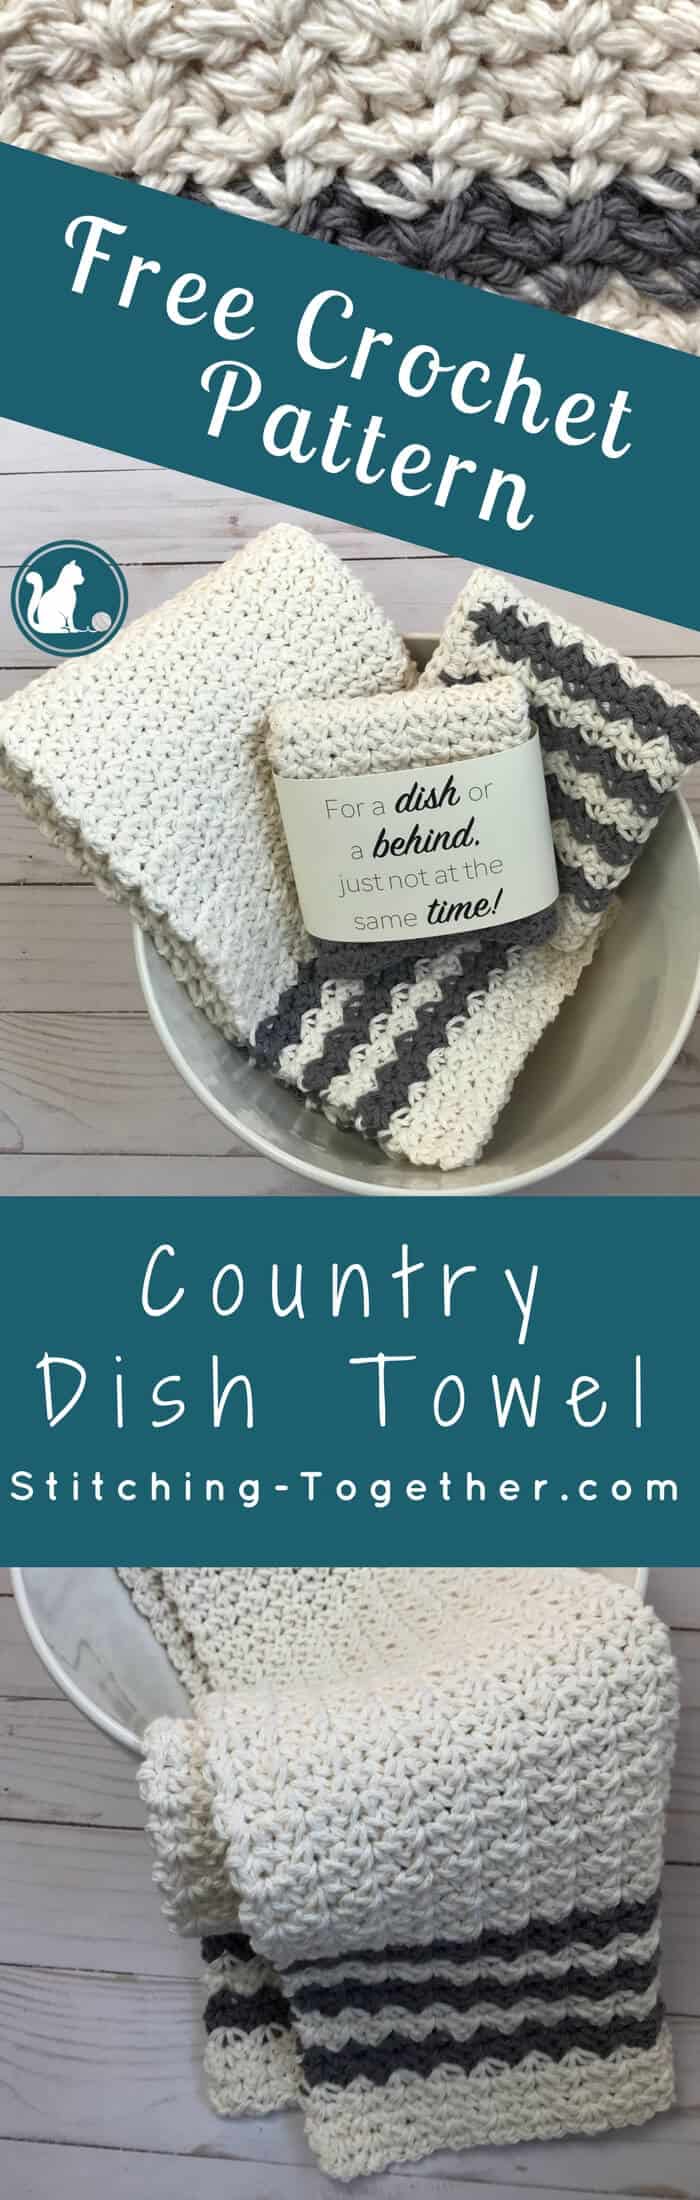 Crocheted Bless the family Kitchen Towel with Dusty Grey Yarn